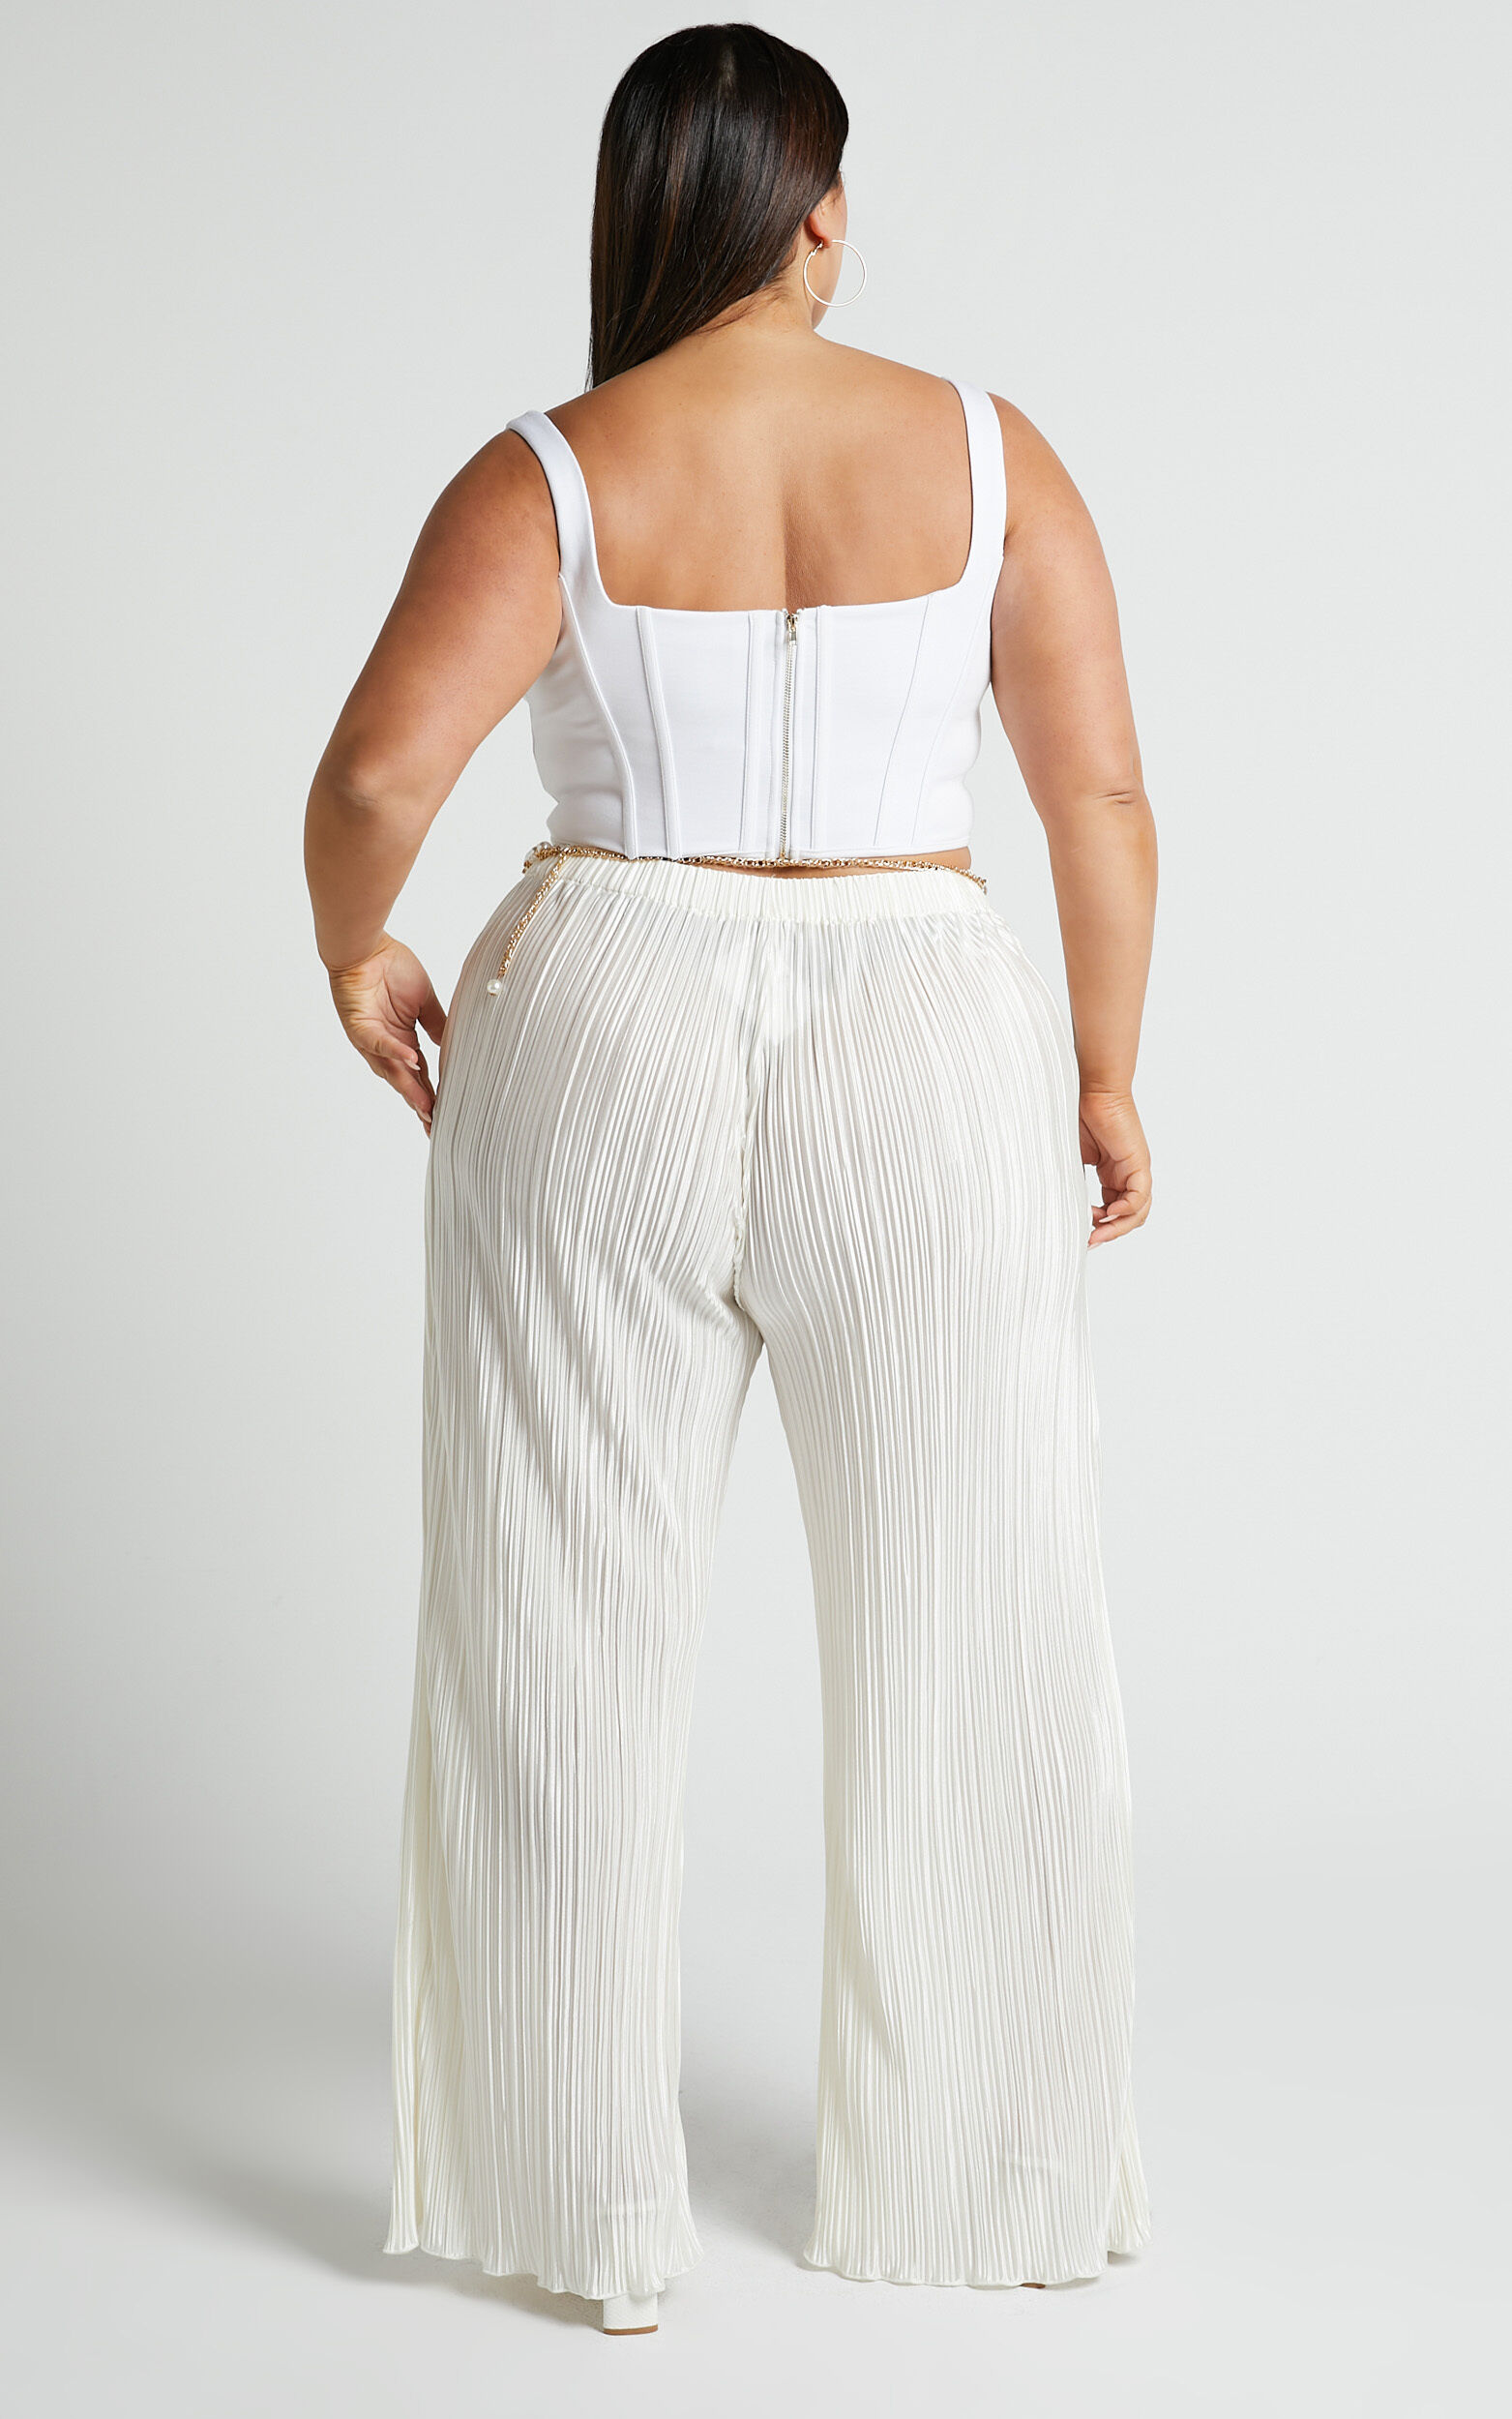 💕 Look at these new flare pants from No Boundaries! So soft + various